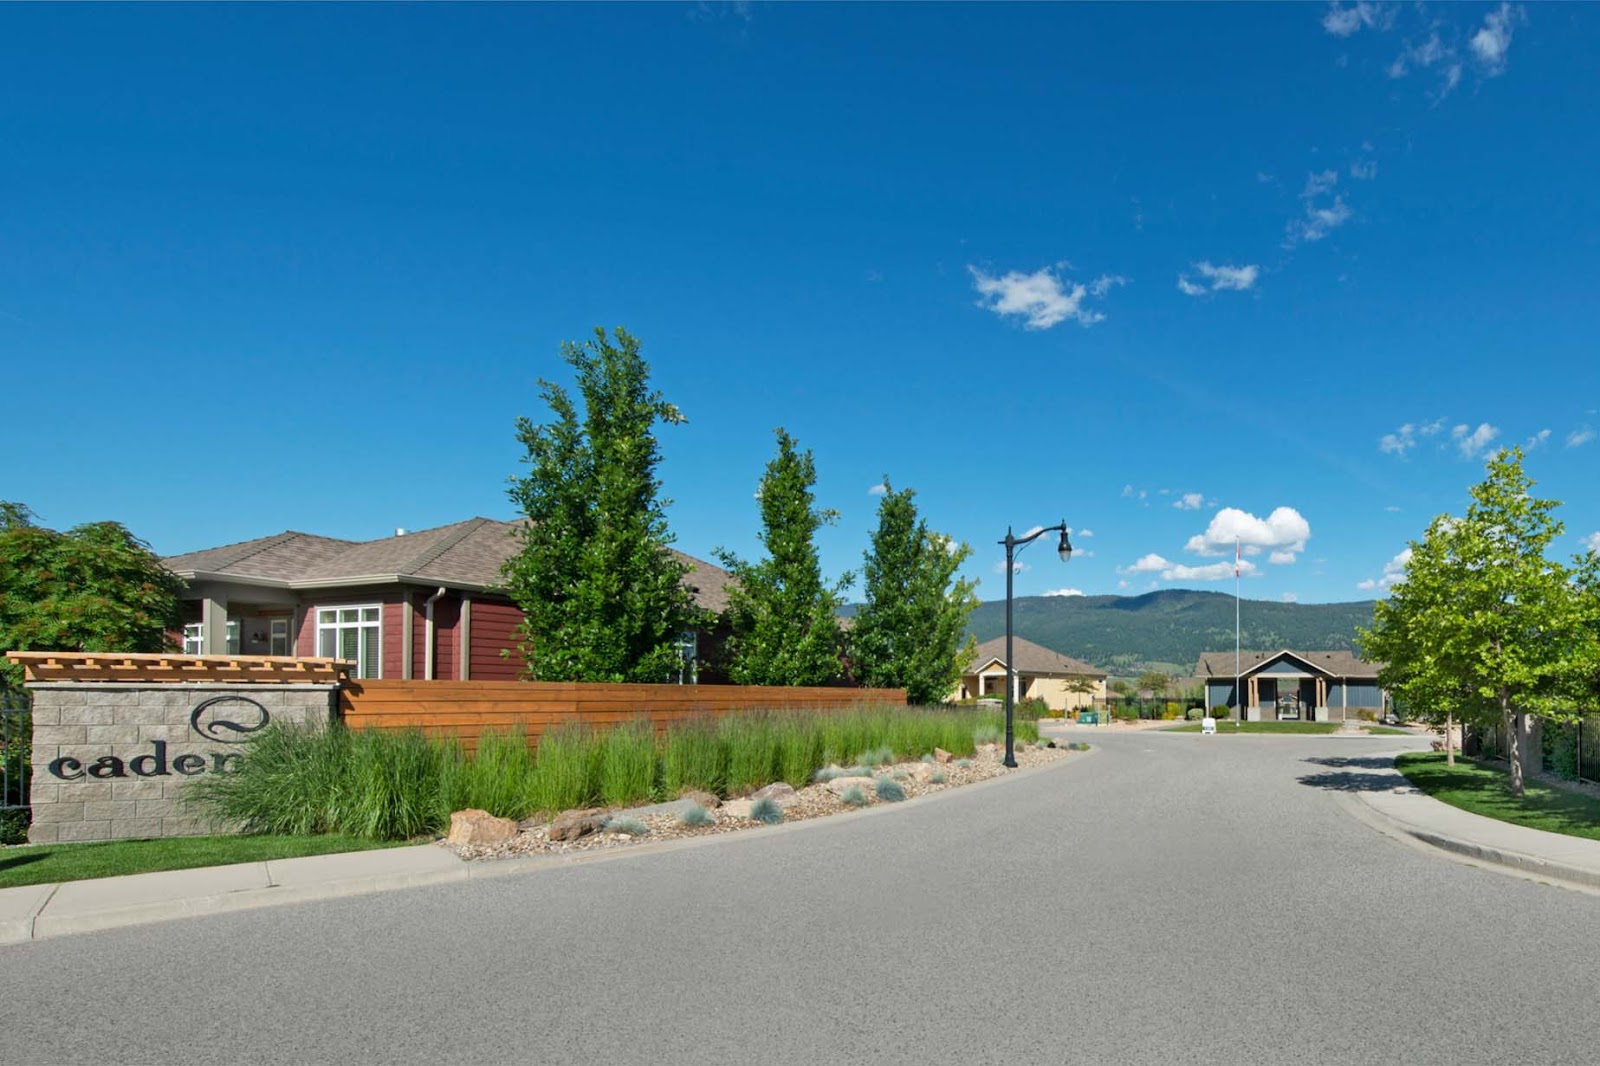 The entry to Cadence at The Lakes, an active adult living community in Lake Country, BC, Canada